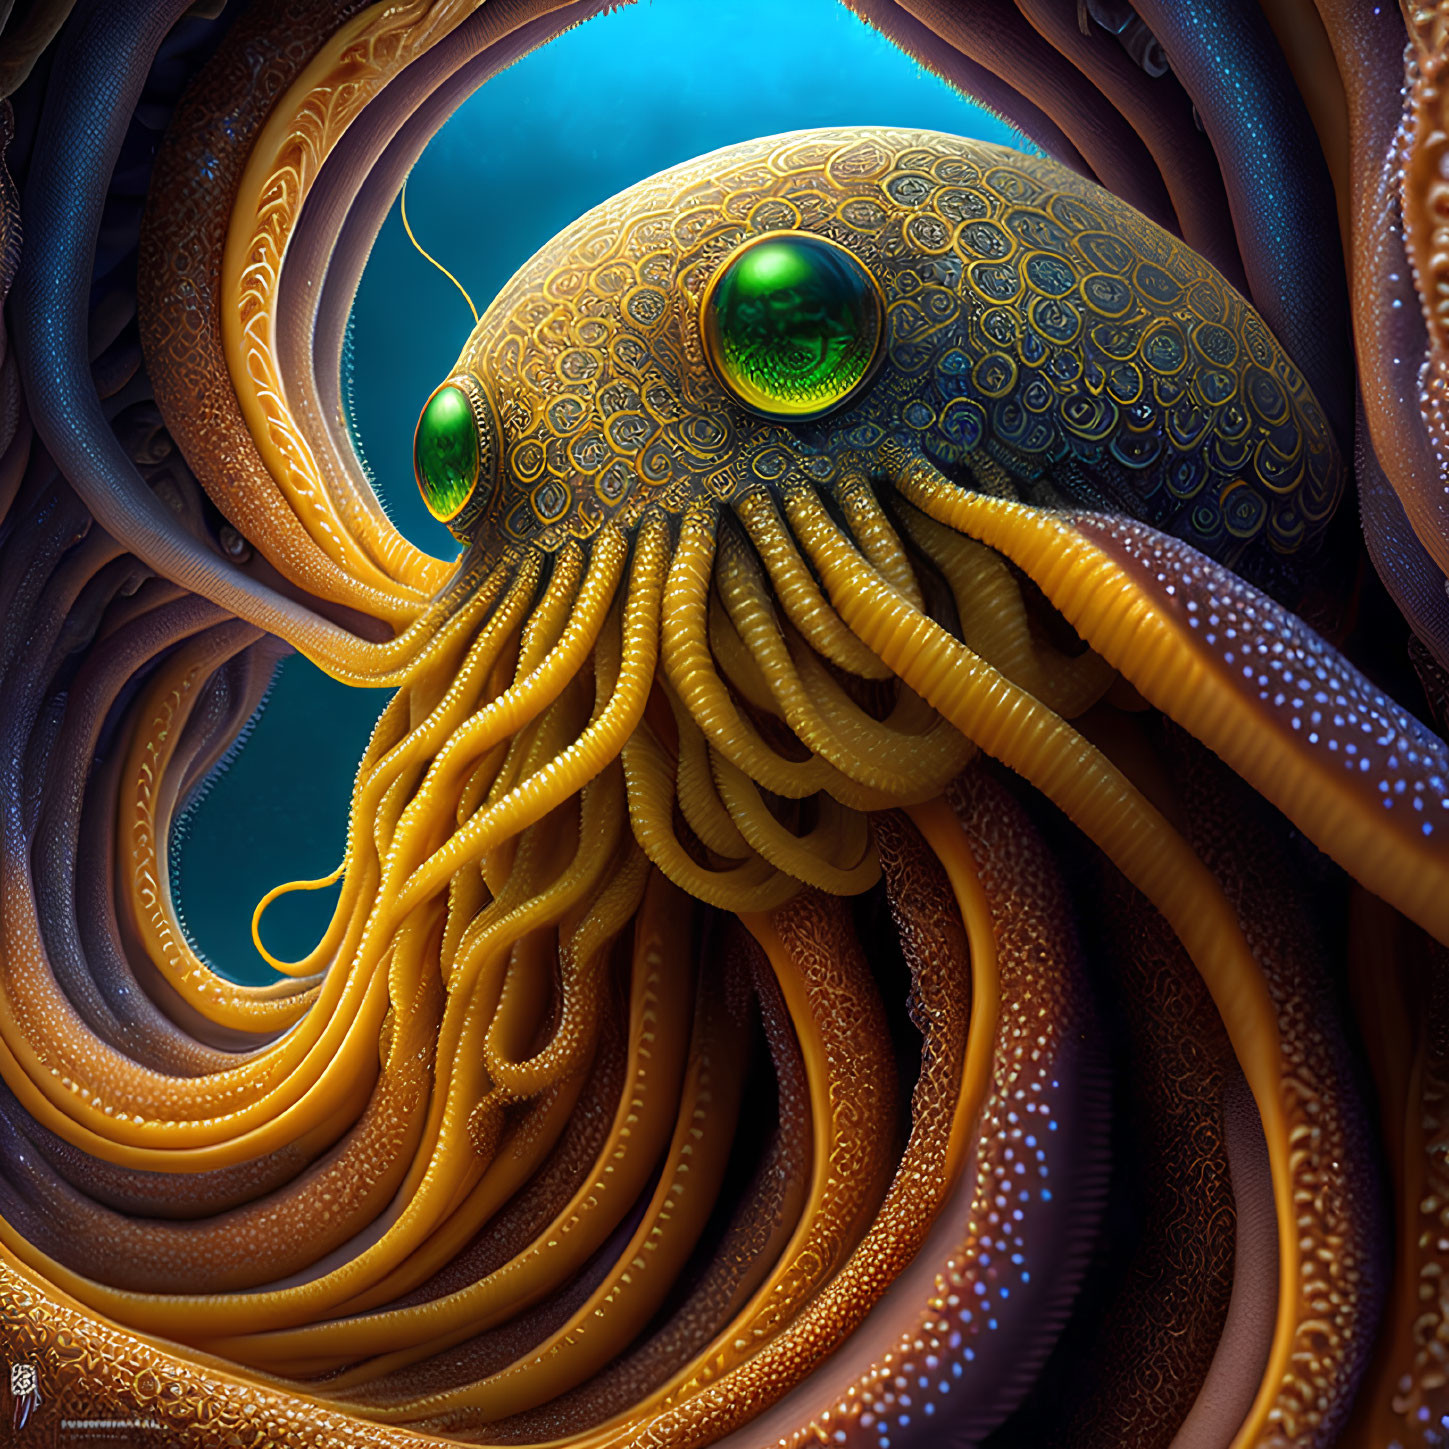 Stylized octopus digital artwork with intricate patterns